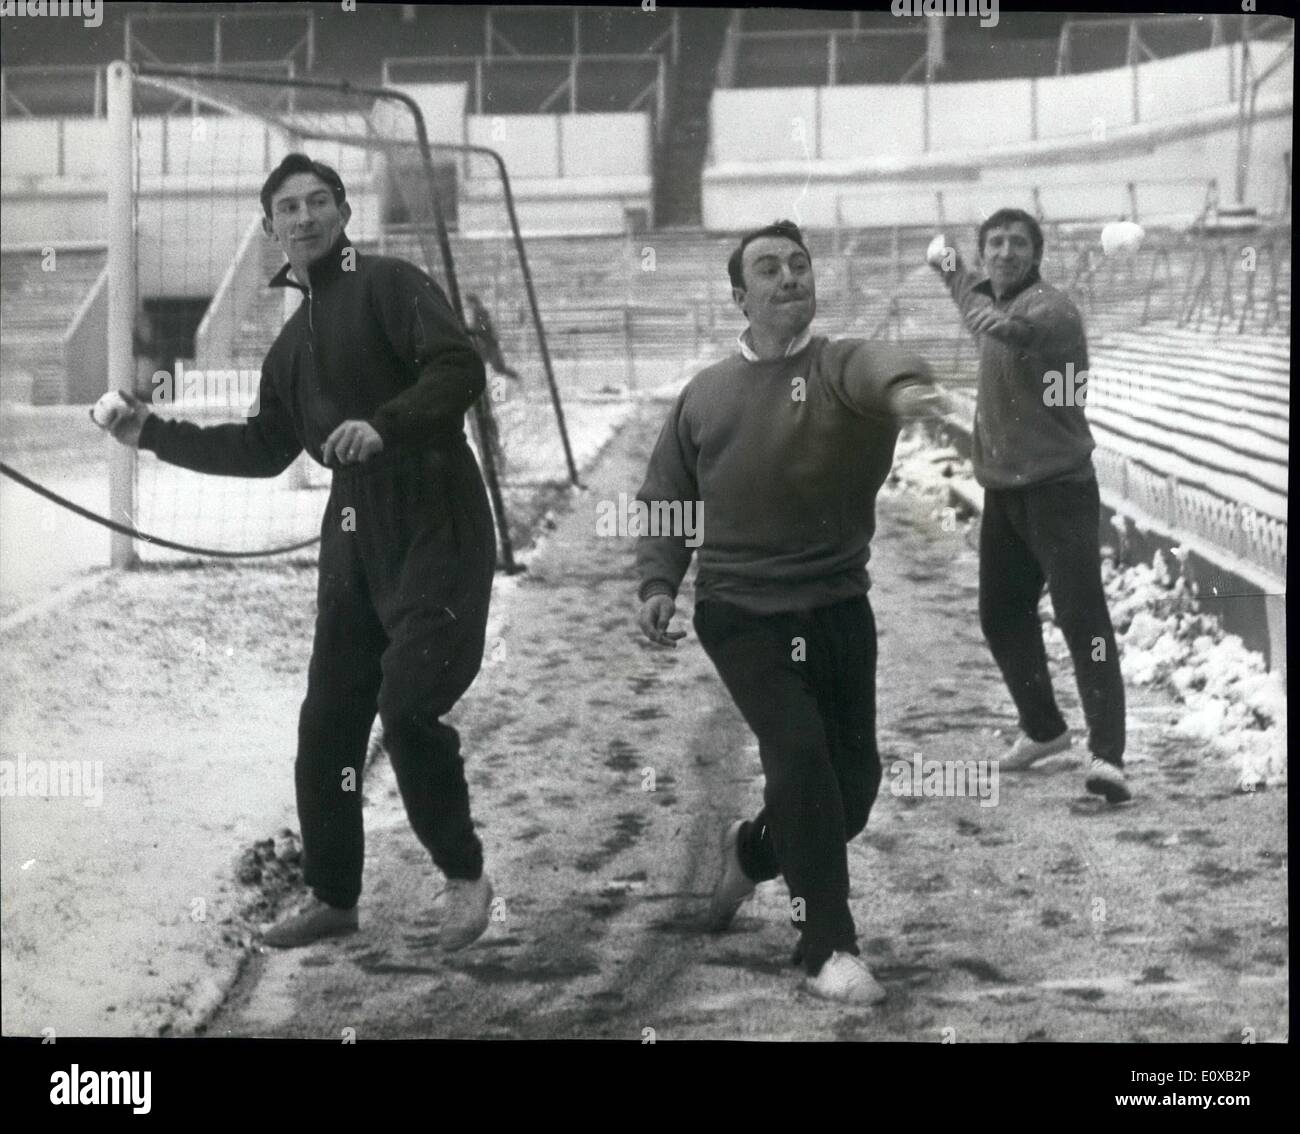 Jan. 01, 1966 - Jimmy Greaves Starts Light Training: Jimmy Greaves this morning reports to White Hart Lane to start light training - for his first football since going down with jaundice ten weeks ago. Photo Shows Spurs players (L. to R.): Bill Brown, Jimmy Greaves and Cliff Jones - indulge in a spot of snowballing - at White Hart Lane toady. Stock Photo